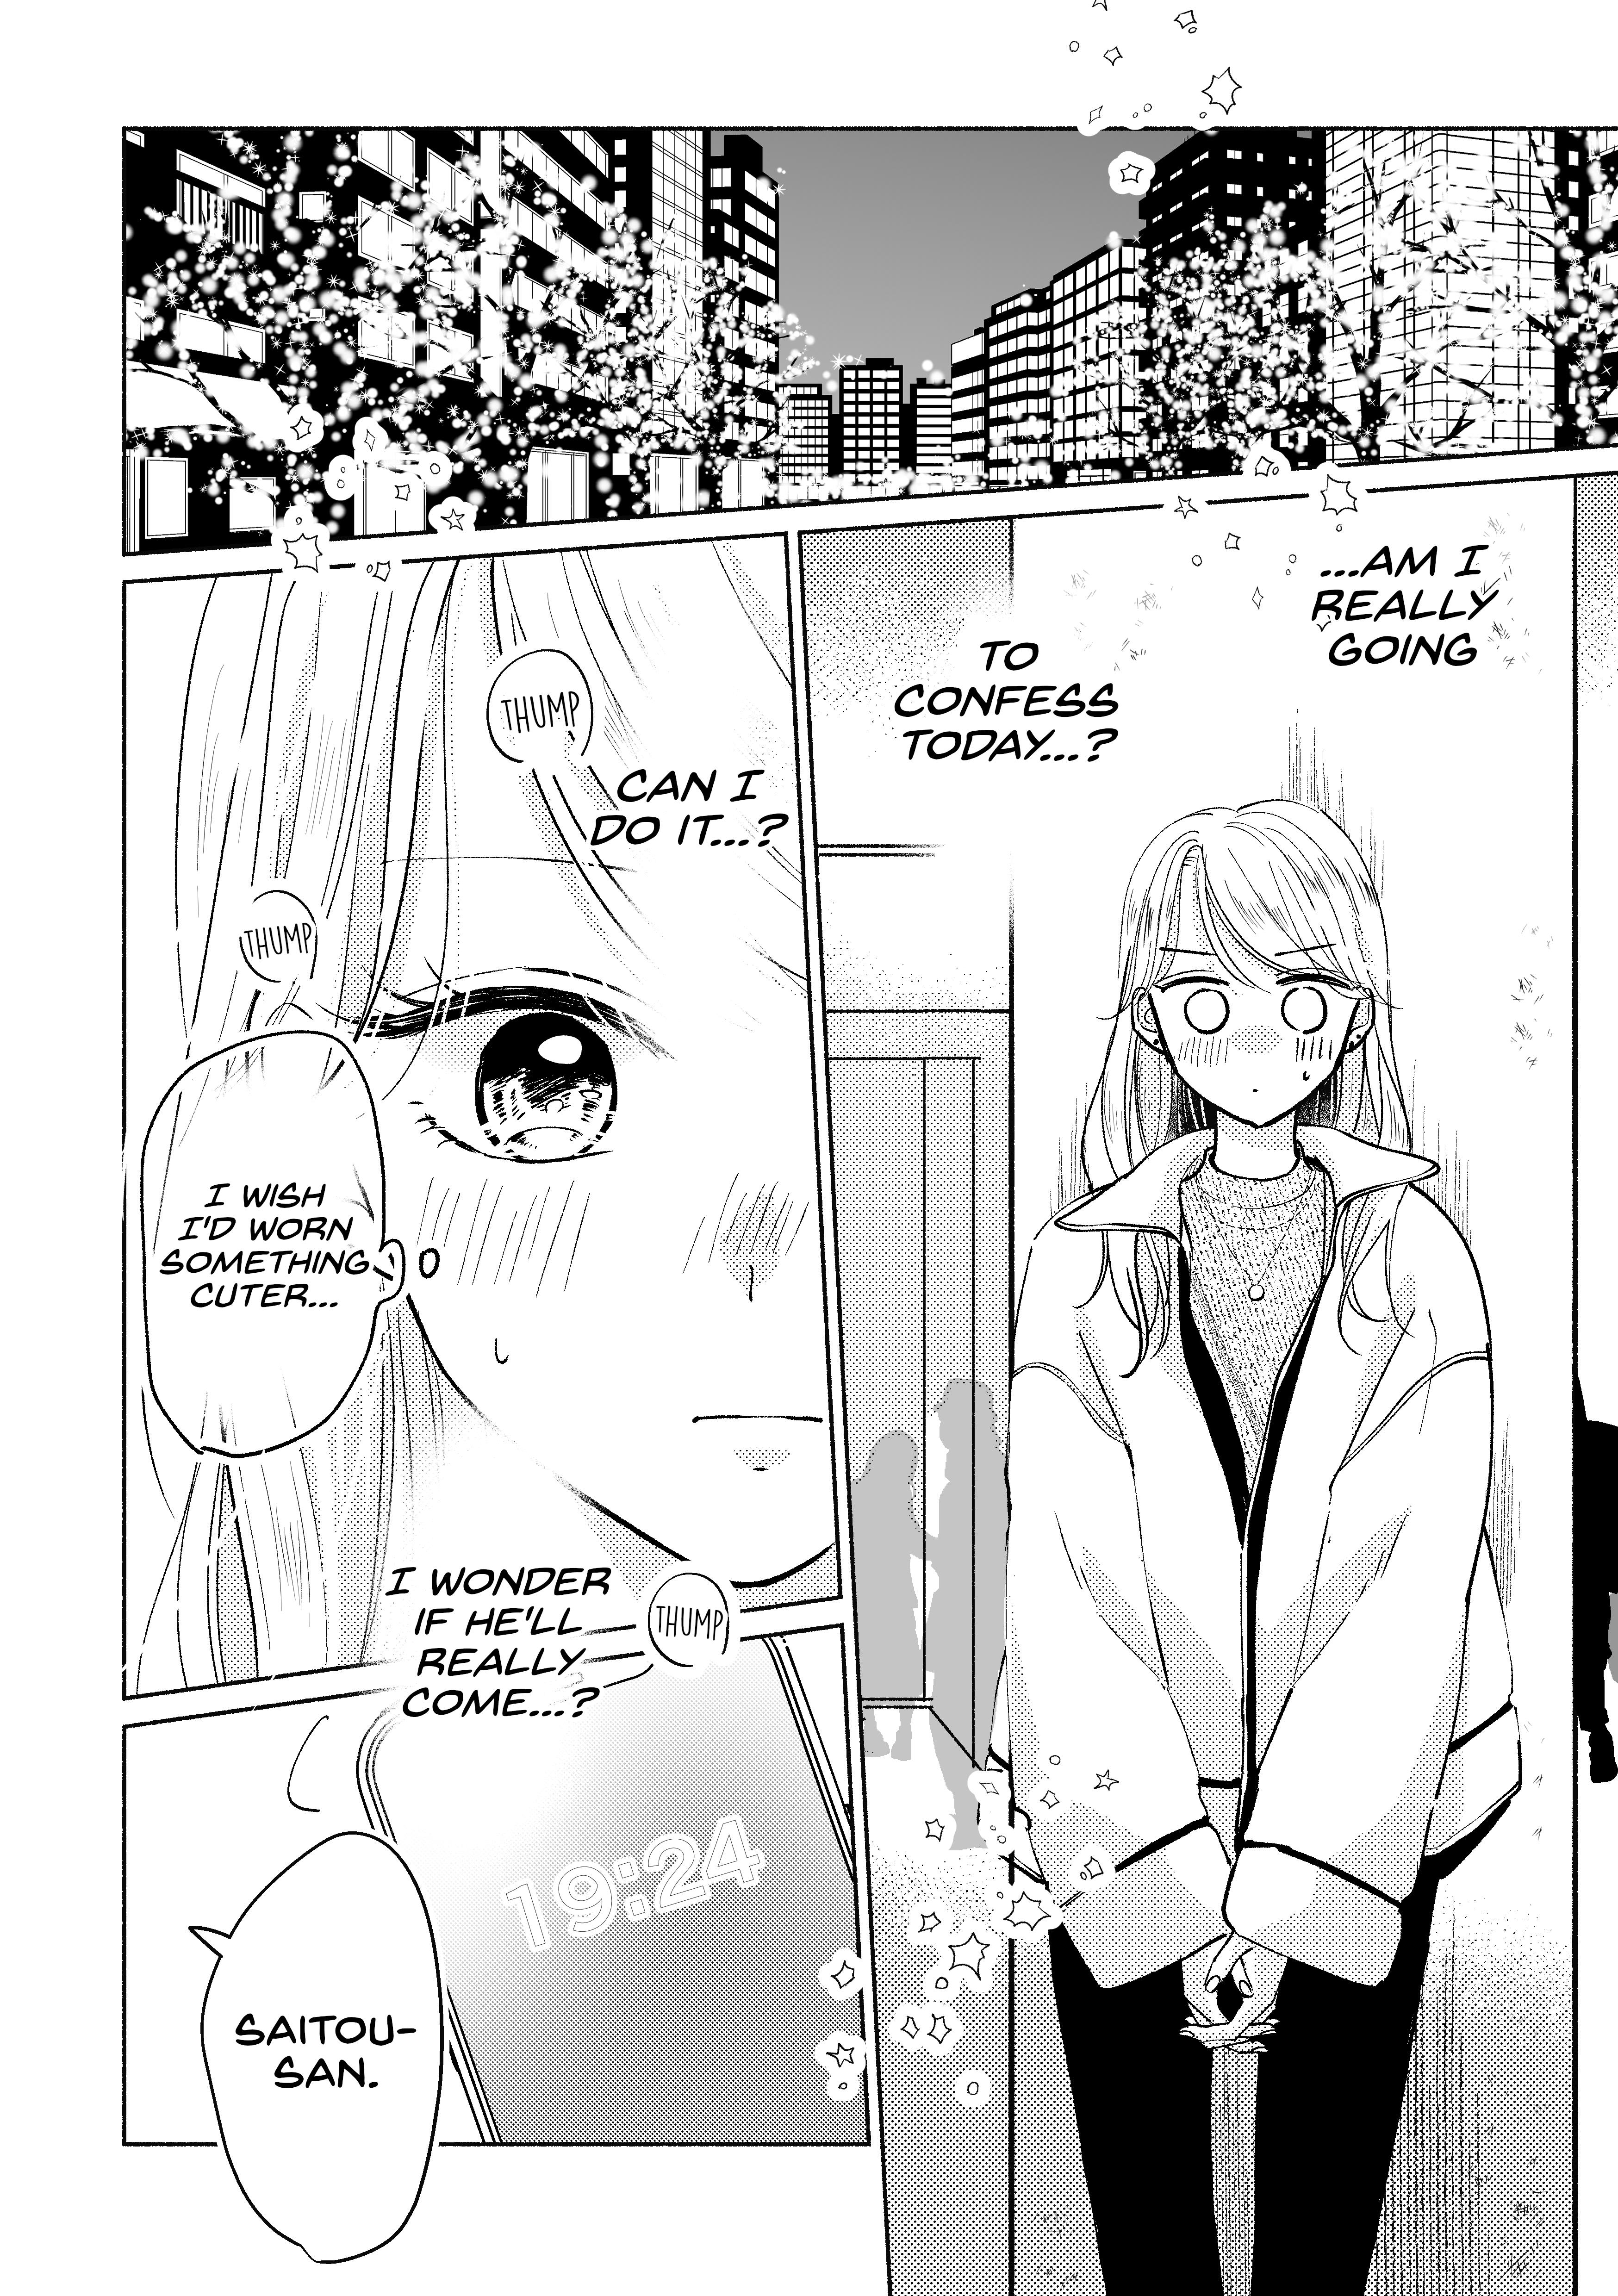 A Story about a Gyaru Working at a Convenience Store Who Gets Closer to a Customer She’s Interested In - chapter 8 - #1